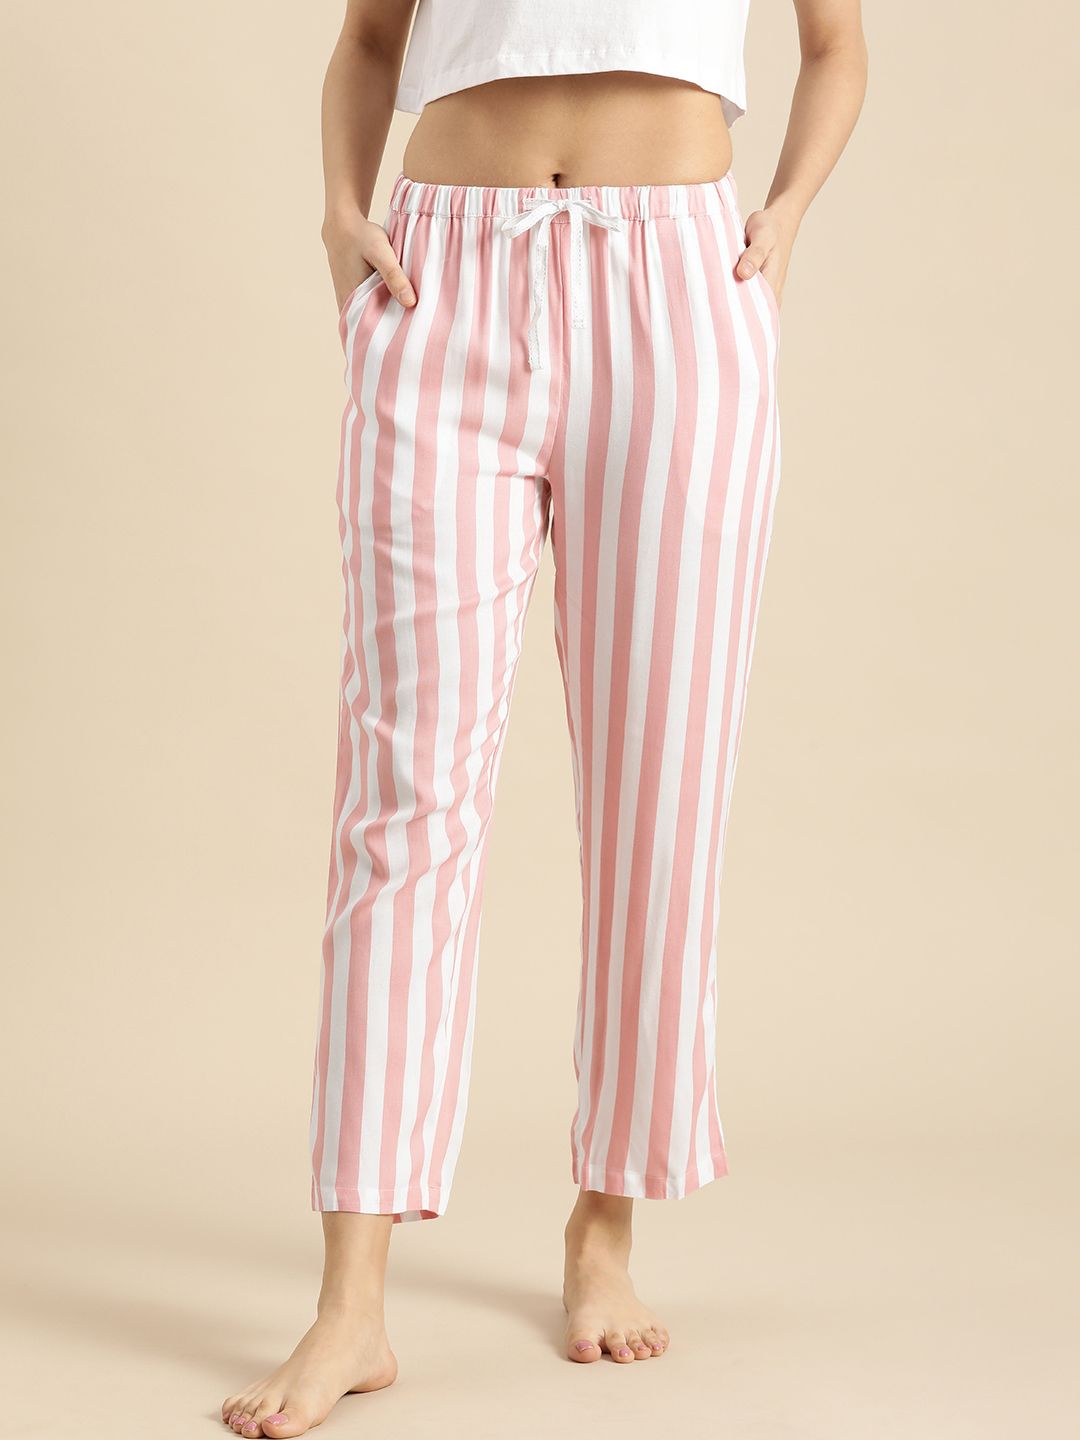 Dreamz by Pantaloons Women Peach Pink & White Mid-Rise Striped Viscose Rayon Lounge Pants Price in India